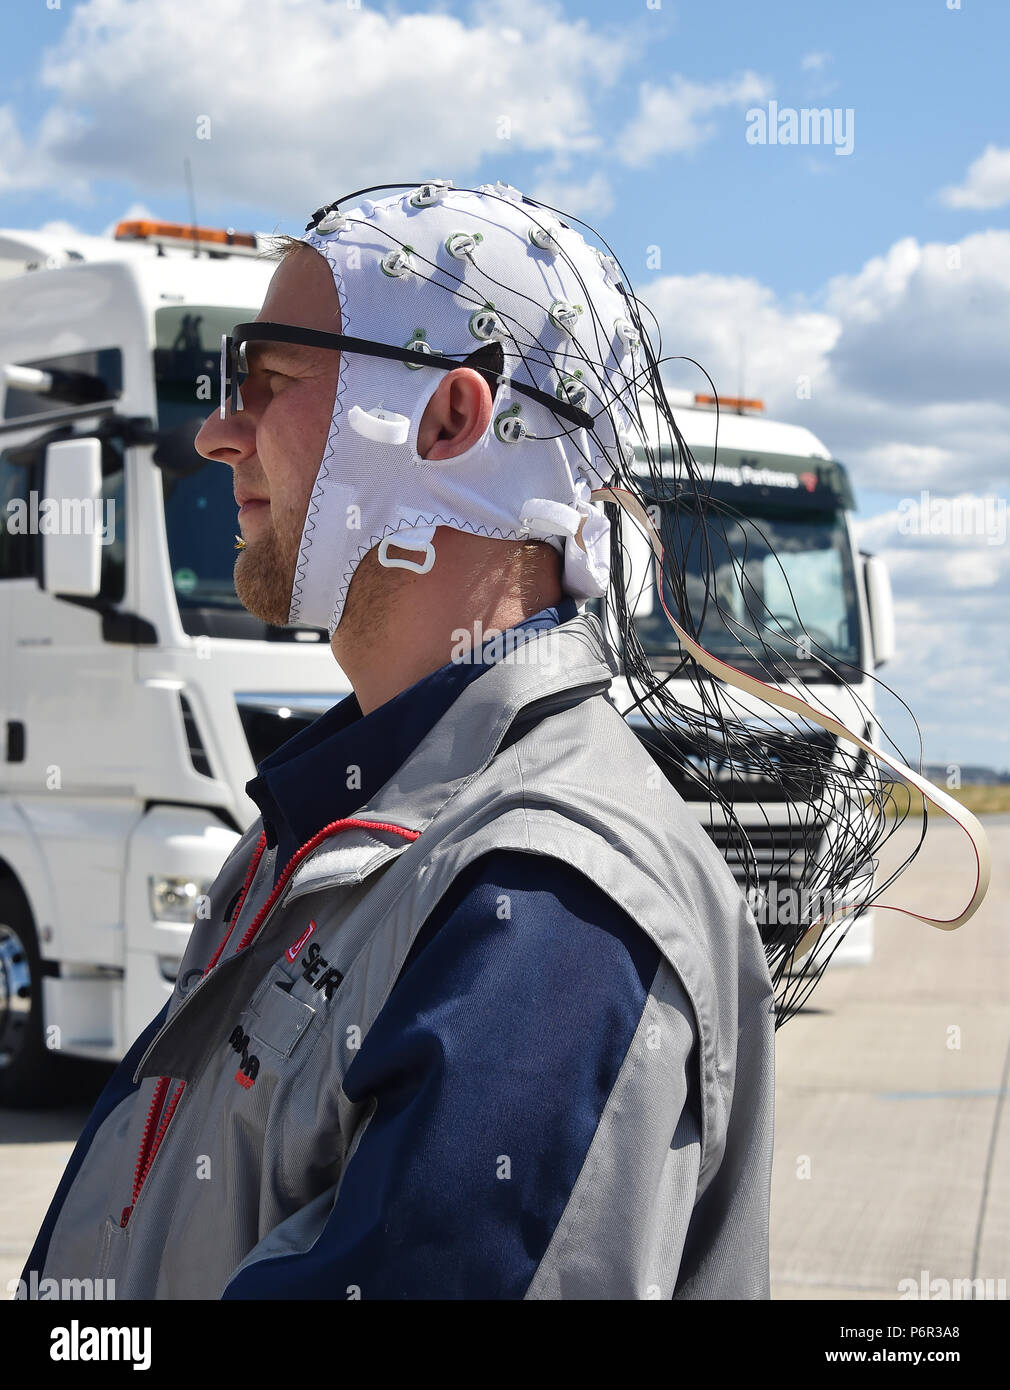 02 July 2018, Germany, Selchow: Truck driver Andy Kipping wearing a control system with which - with the aid of electroencephalography (EEG) and eye tracking - the effects of semi-autonomous driving on the driver's wakefulness and role understanding can be tracked, during a demonstration of platooning in autonomous driving in the unused south strip of Schoenefeld Airport. Platooning is convoy driving with very small distances between trucks through the aid of a technological driving system. DB Schenker, MAN Truck & Bus and the Fresenius University of Applied Sciences are for the first time tes Stock Photo